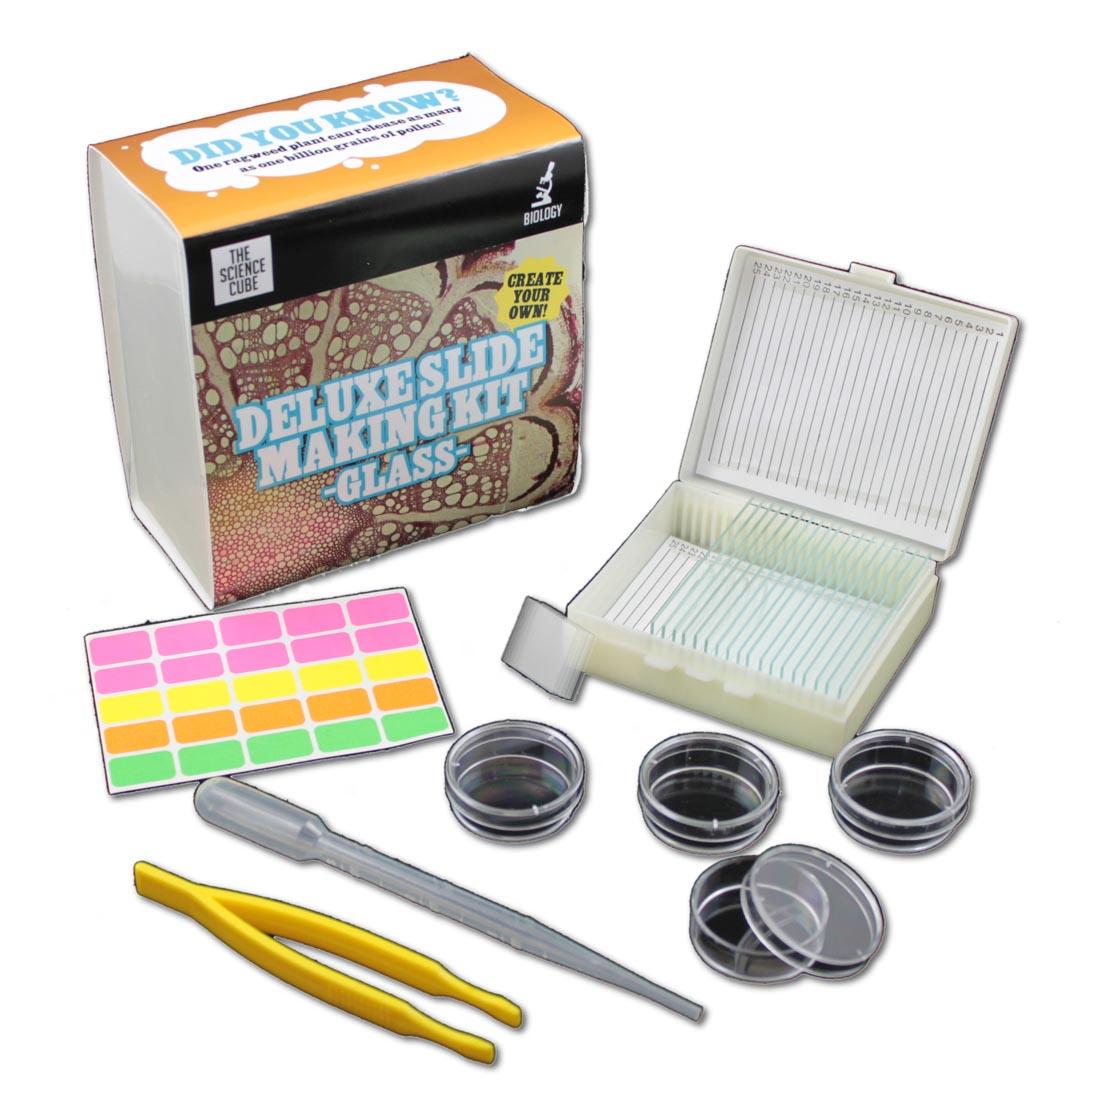 Components of The Science Cube Deluxe Glass Slide Making Kit, including petri dishes, pipette, forceps, labels and glass slides